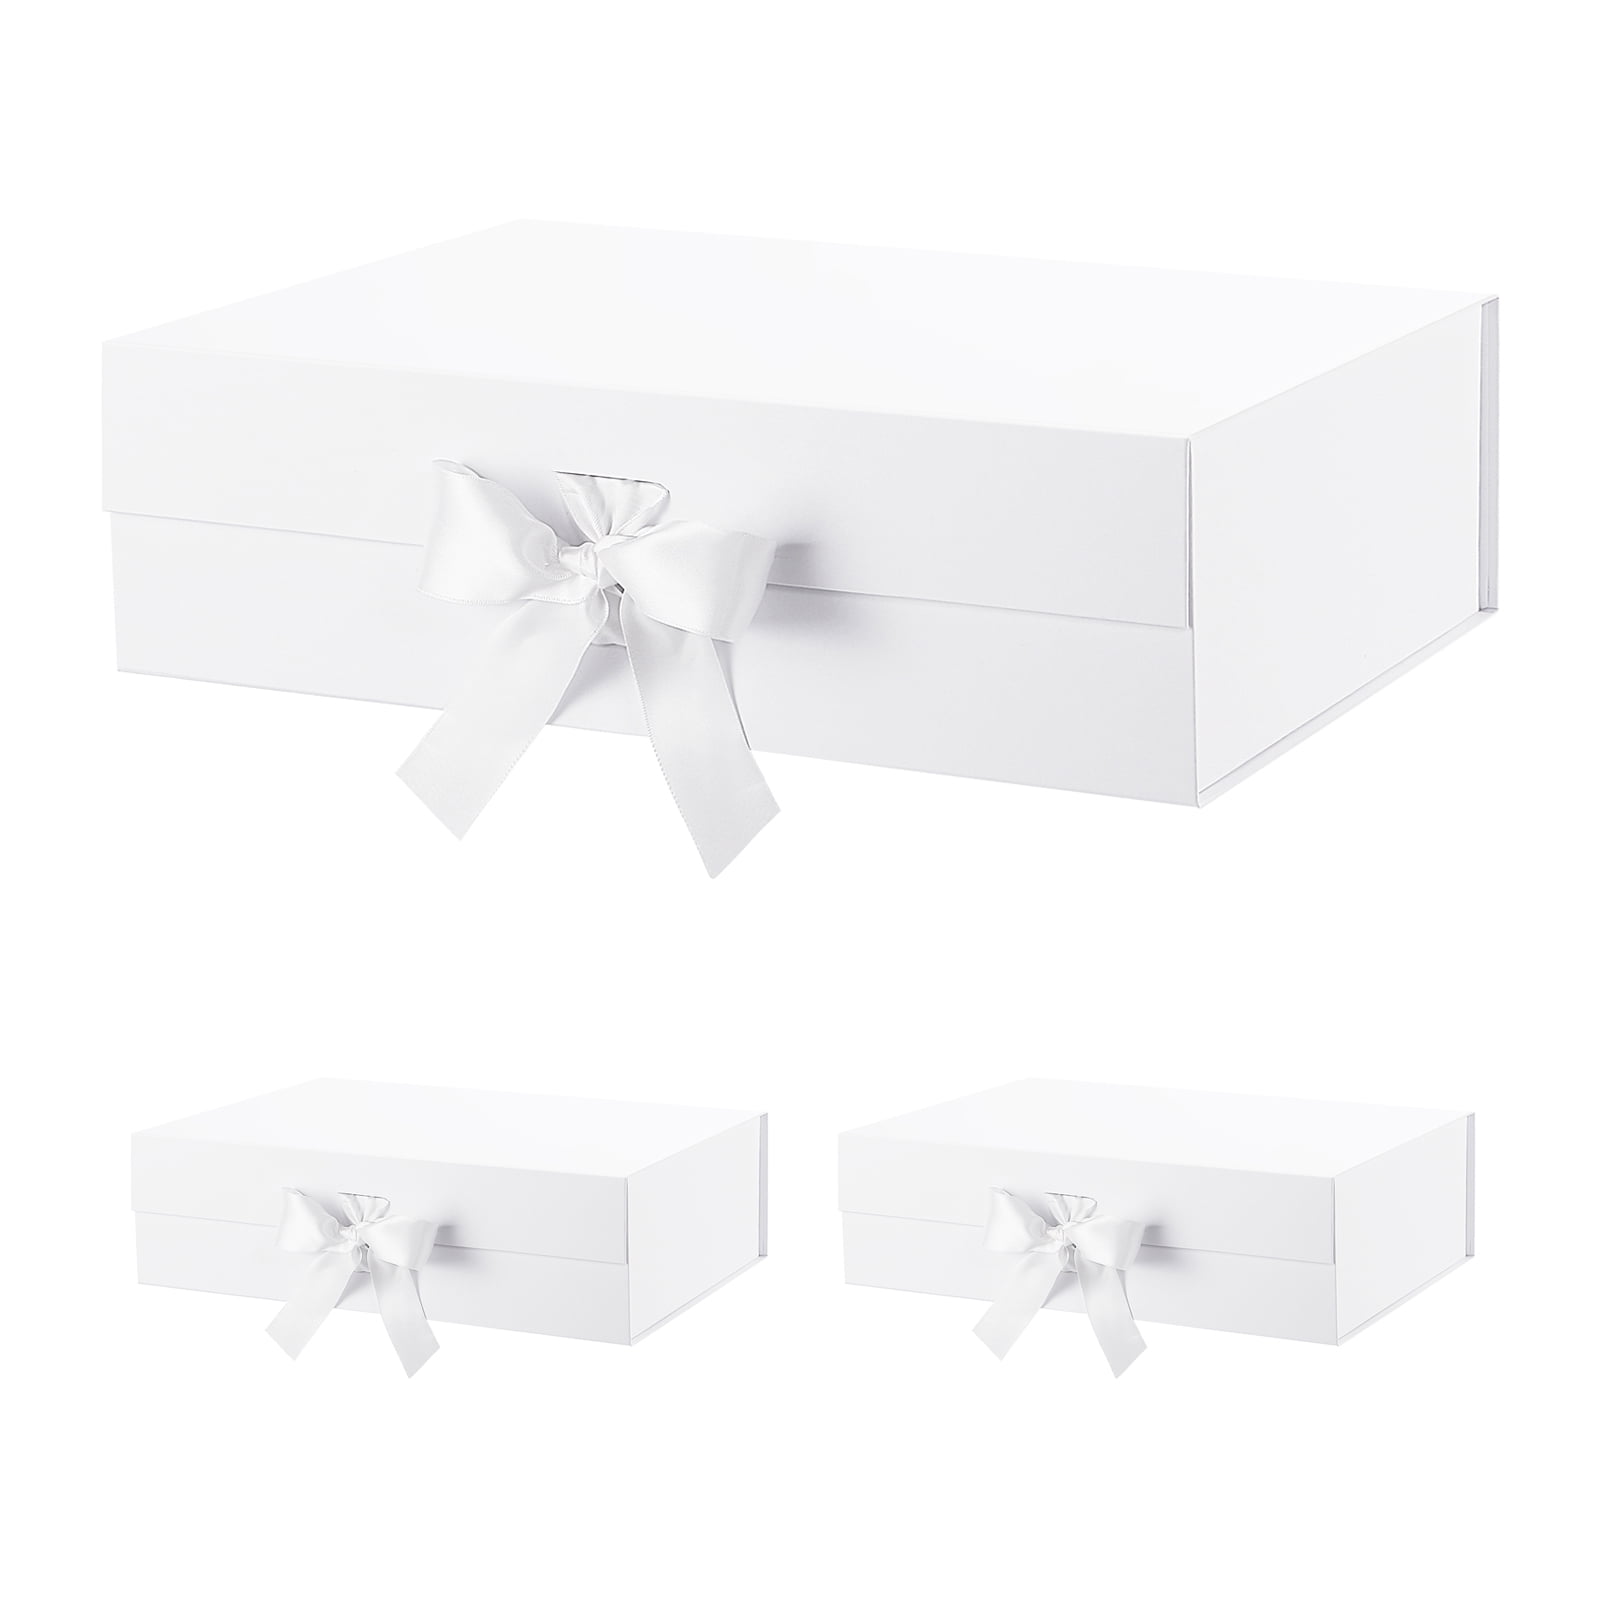 5 WHITE 5 x 5 x 1 INCH BOXES CAKES GARMENTS GIFTS COOKIES BISCUITS ETC